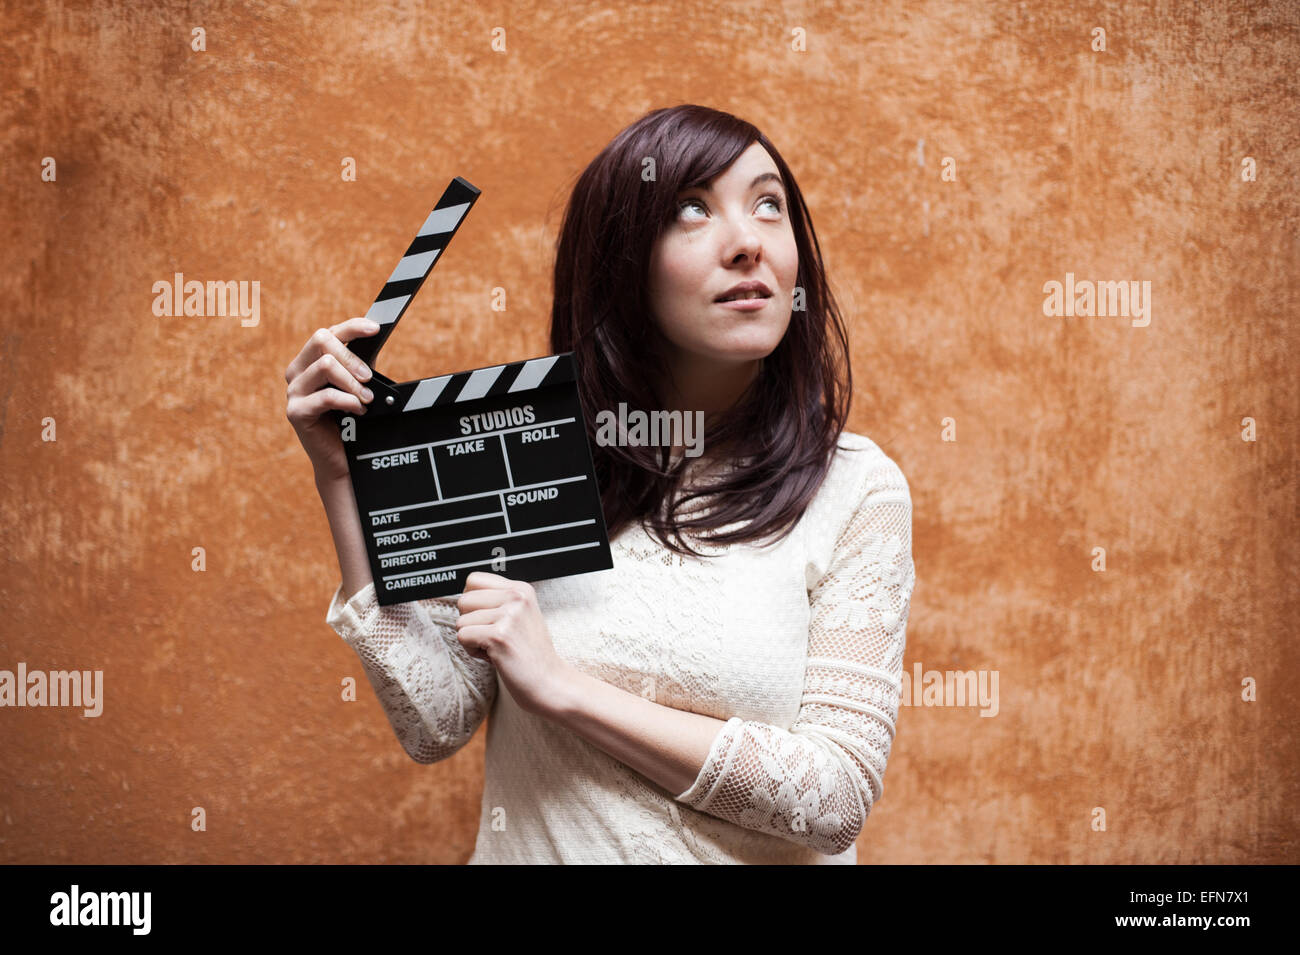 Young woman in 70s hippie style closeup with clapperboard, outdoor orange wall background Stock Photo